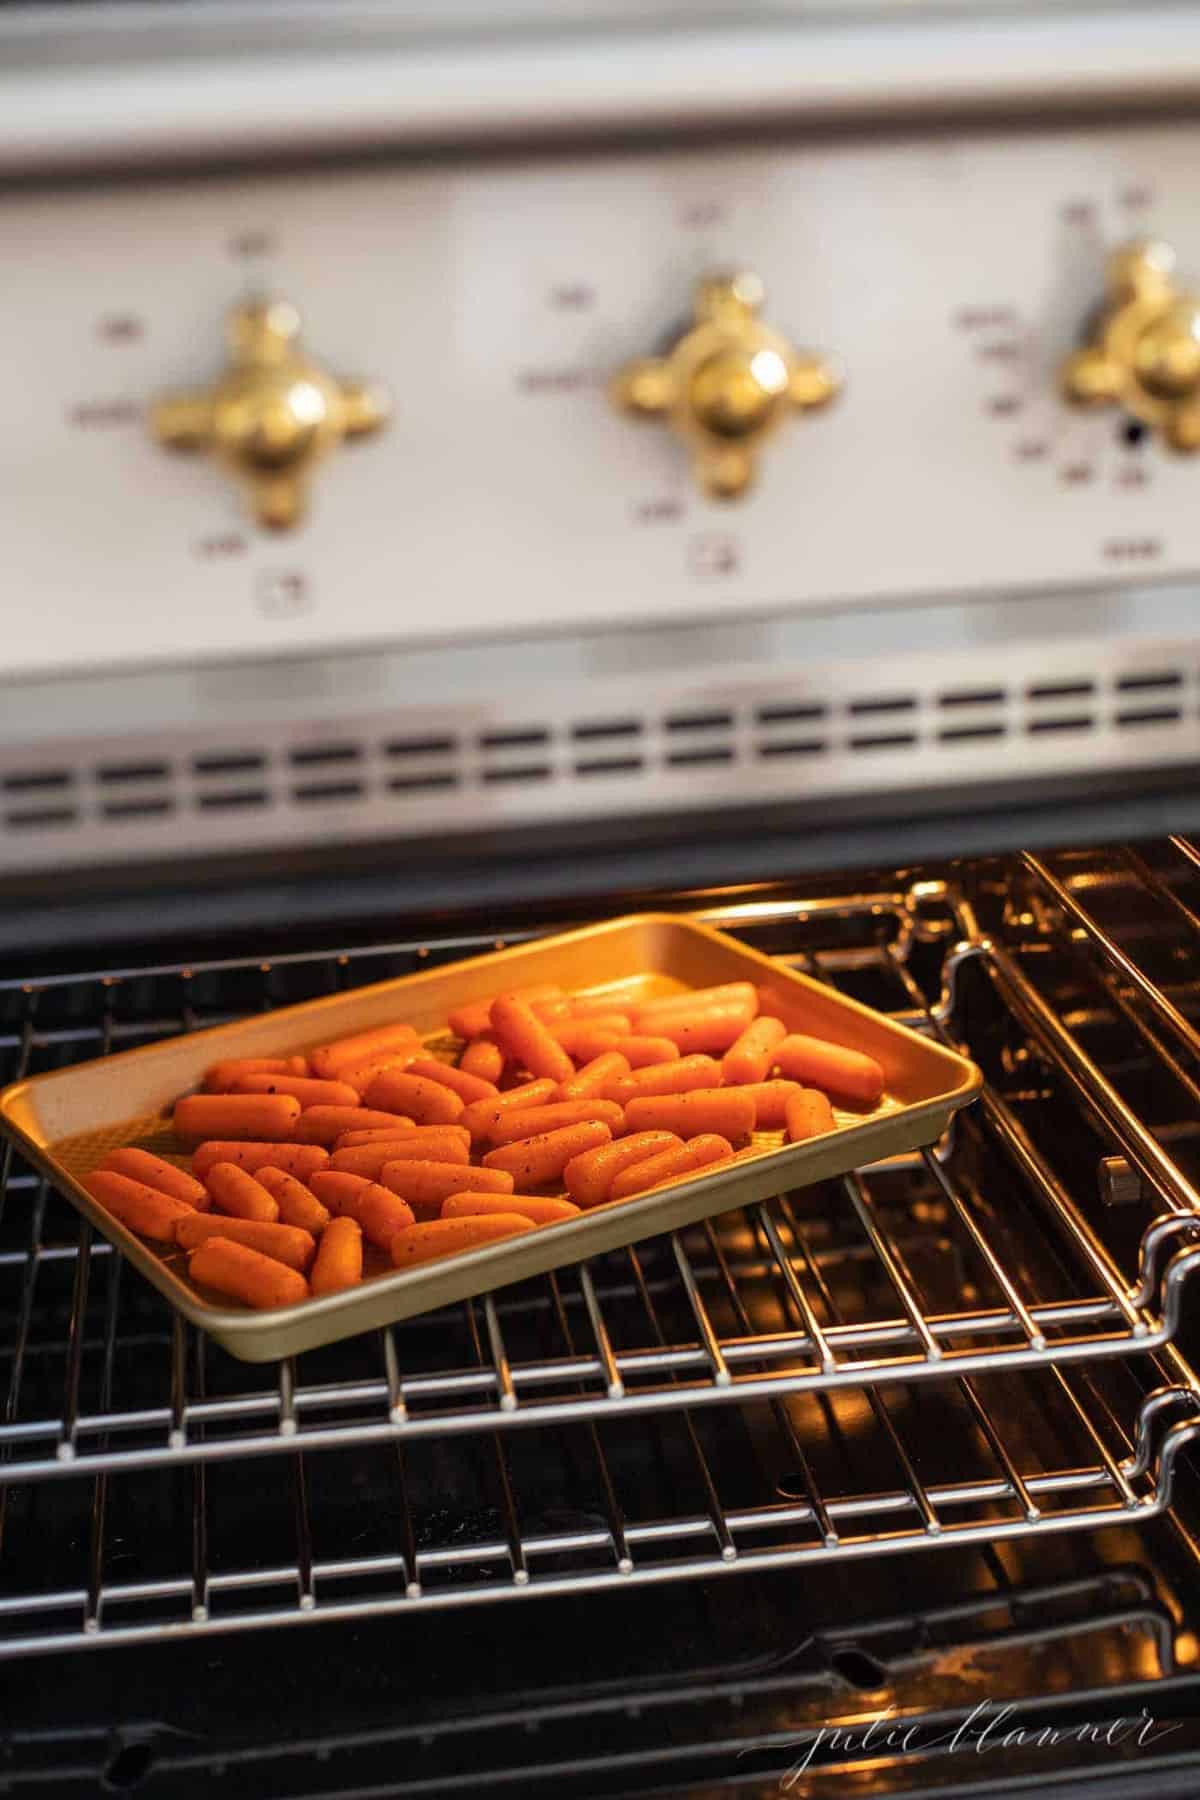 Looking inside a range, with a gold sheet of roasted dill carrots.